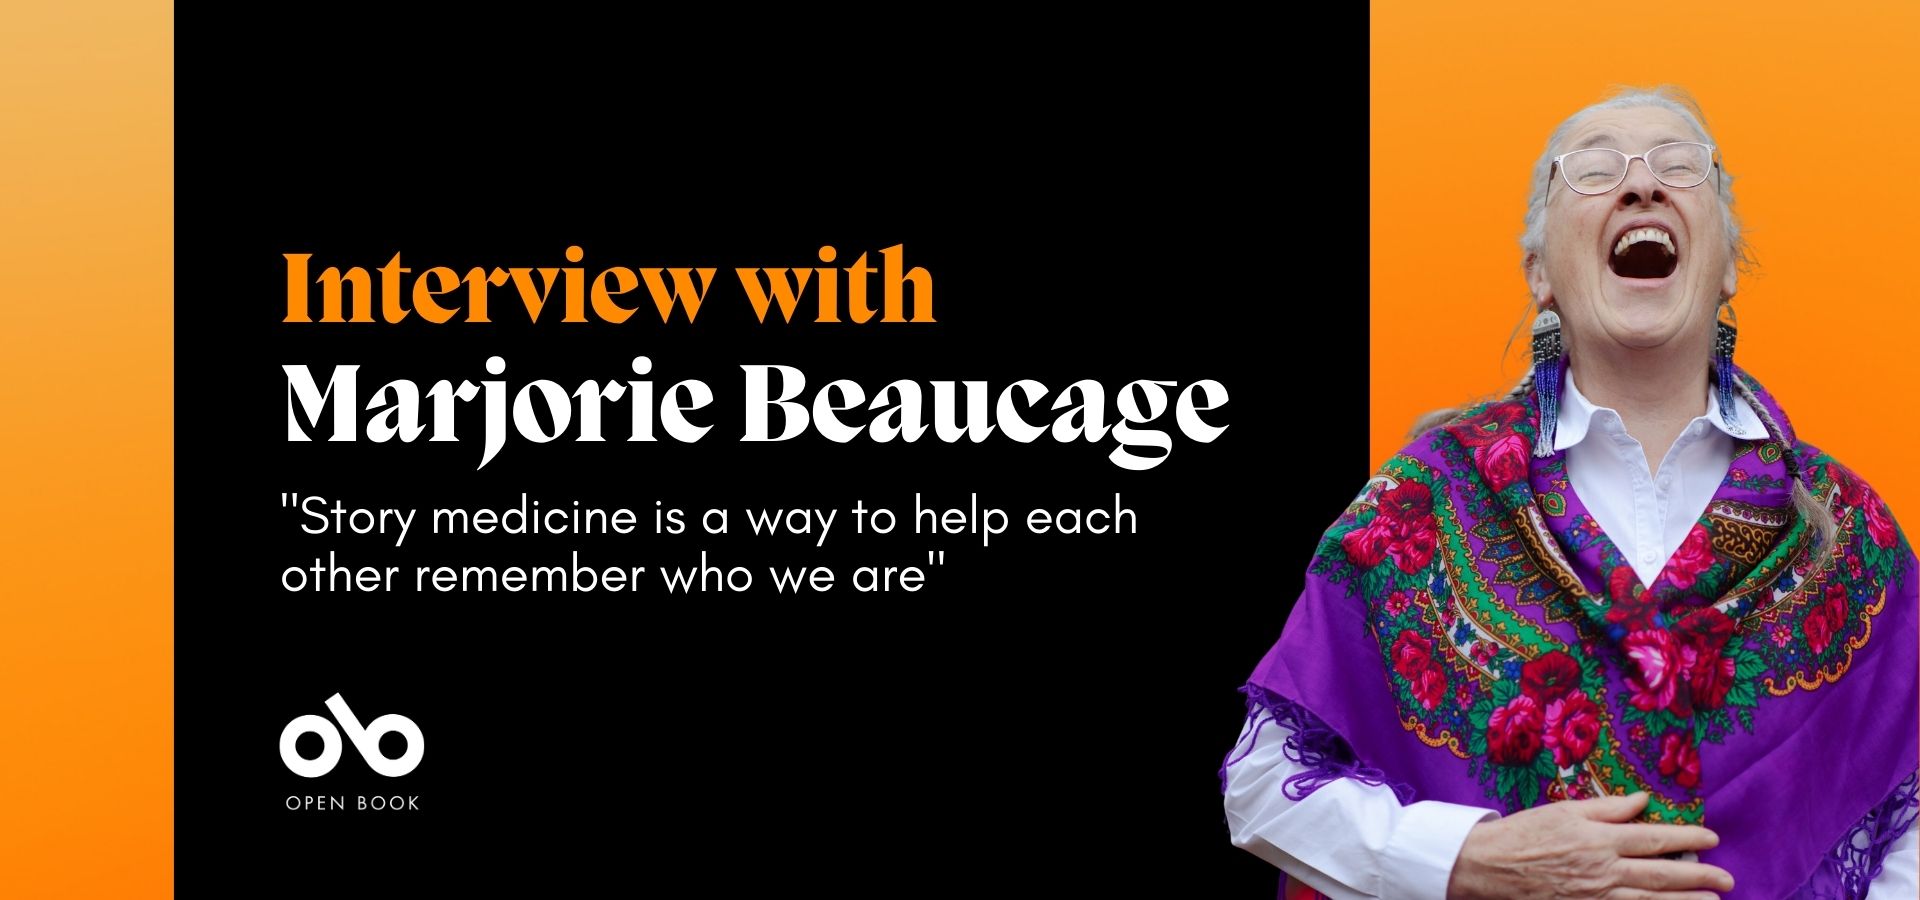 Orange and black banner image with a photo of author and activist Marjorie Beaucage and text reading "Interview with Marjorie Beaucage" and "Story medicine is a way to help each other remember who we are"